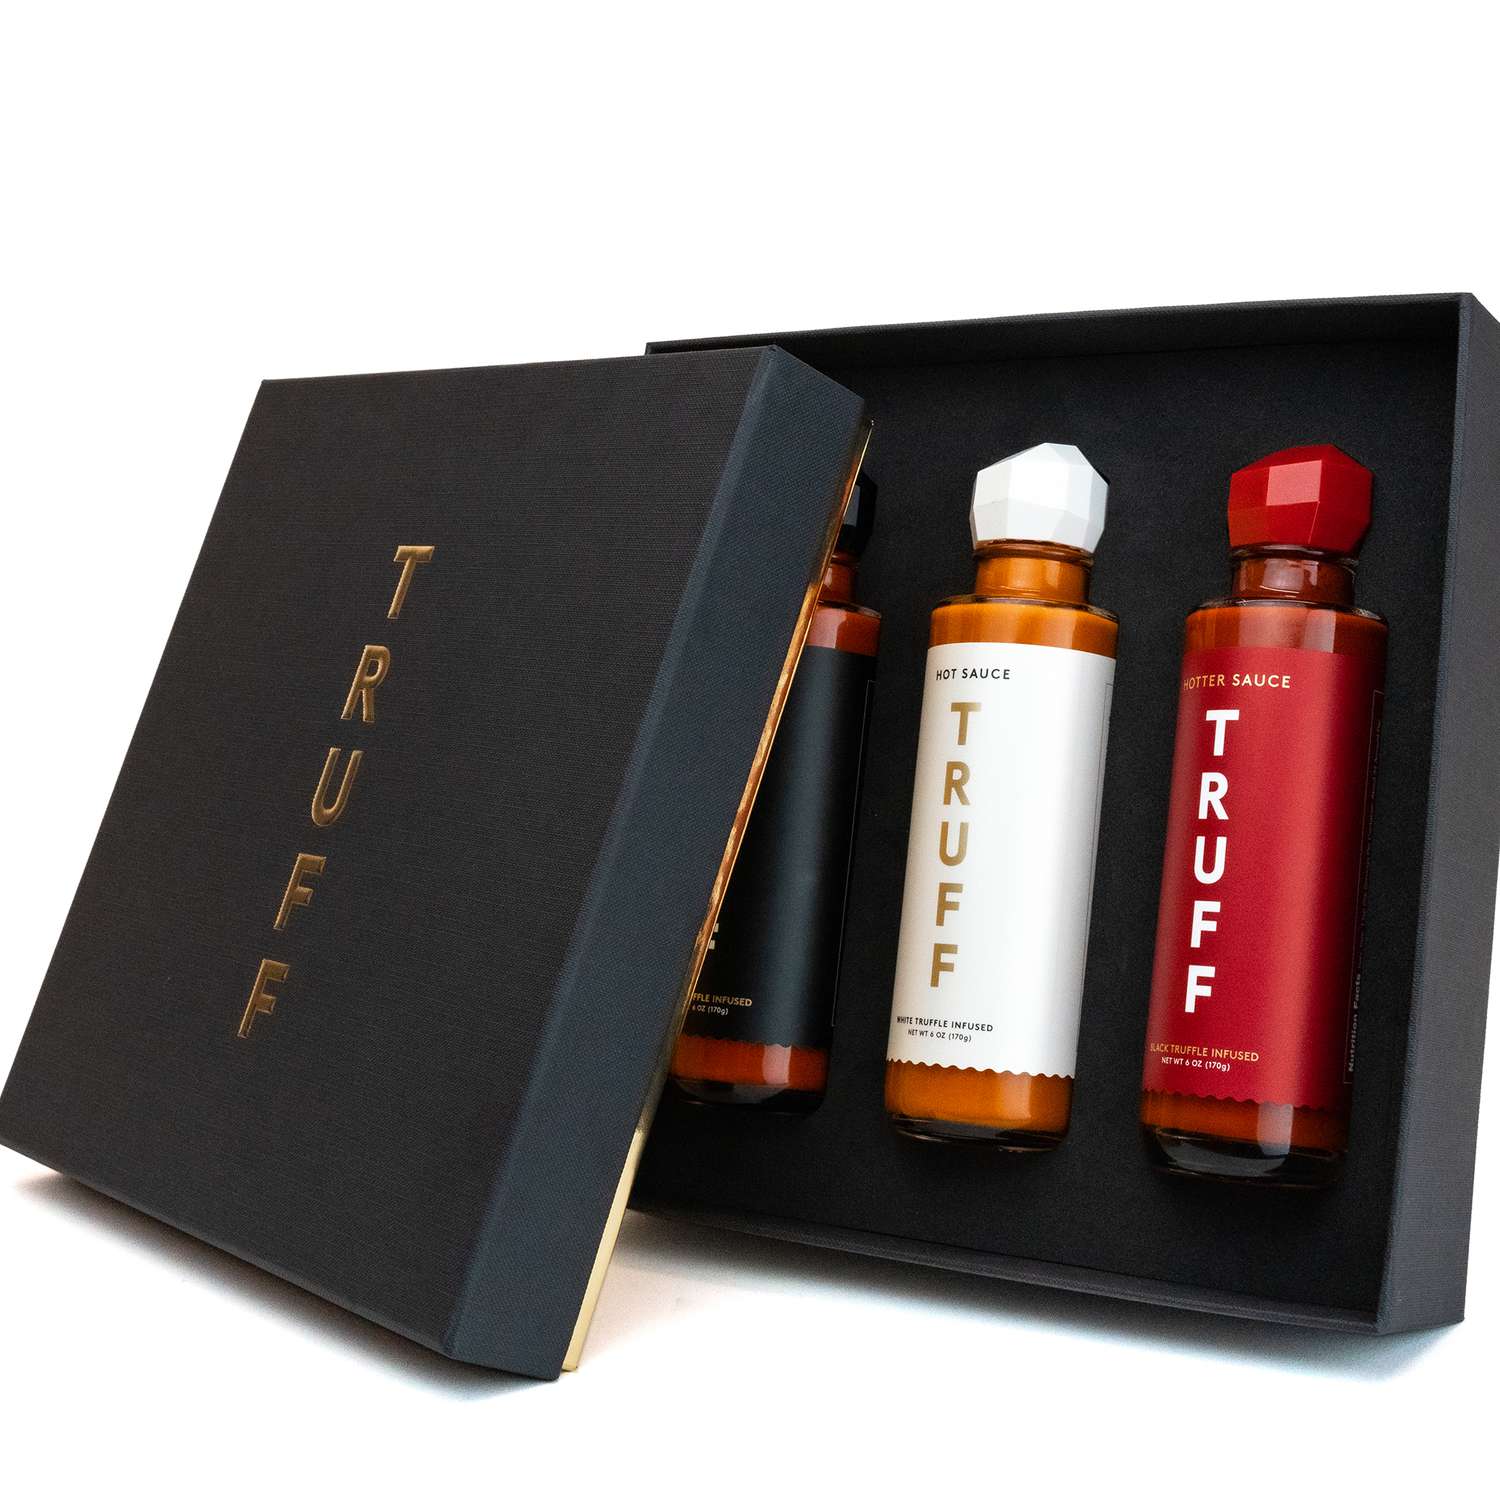 Truff 3 pack gift set on a white background